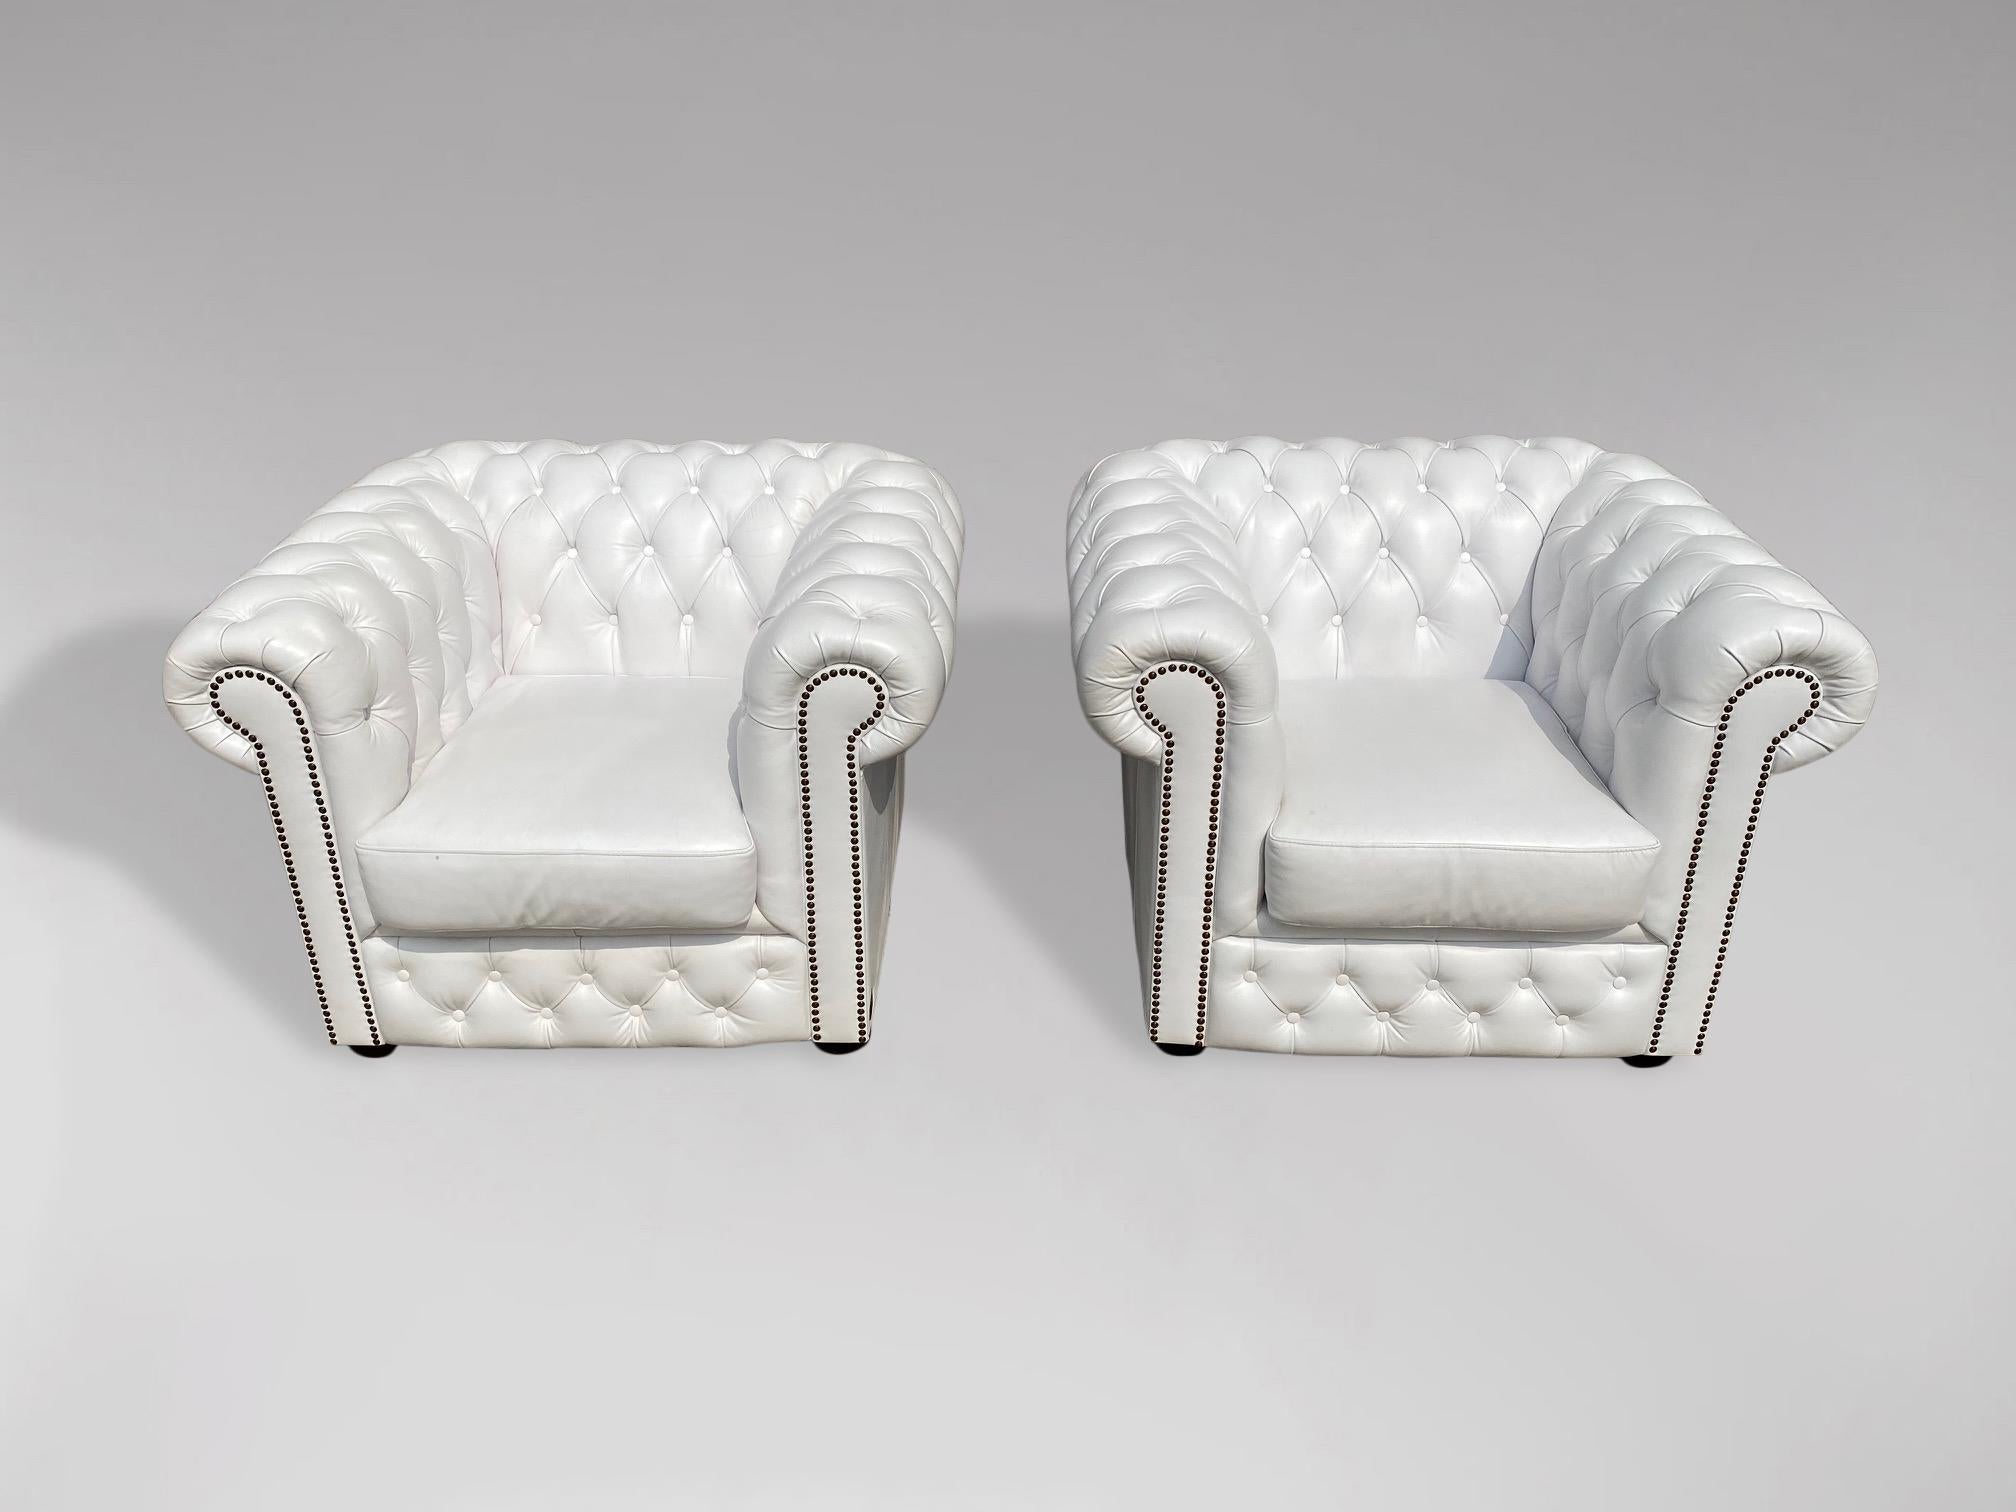 British 20th Century Pair of White Leather Chesterfield Club Armchairs For Sale